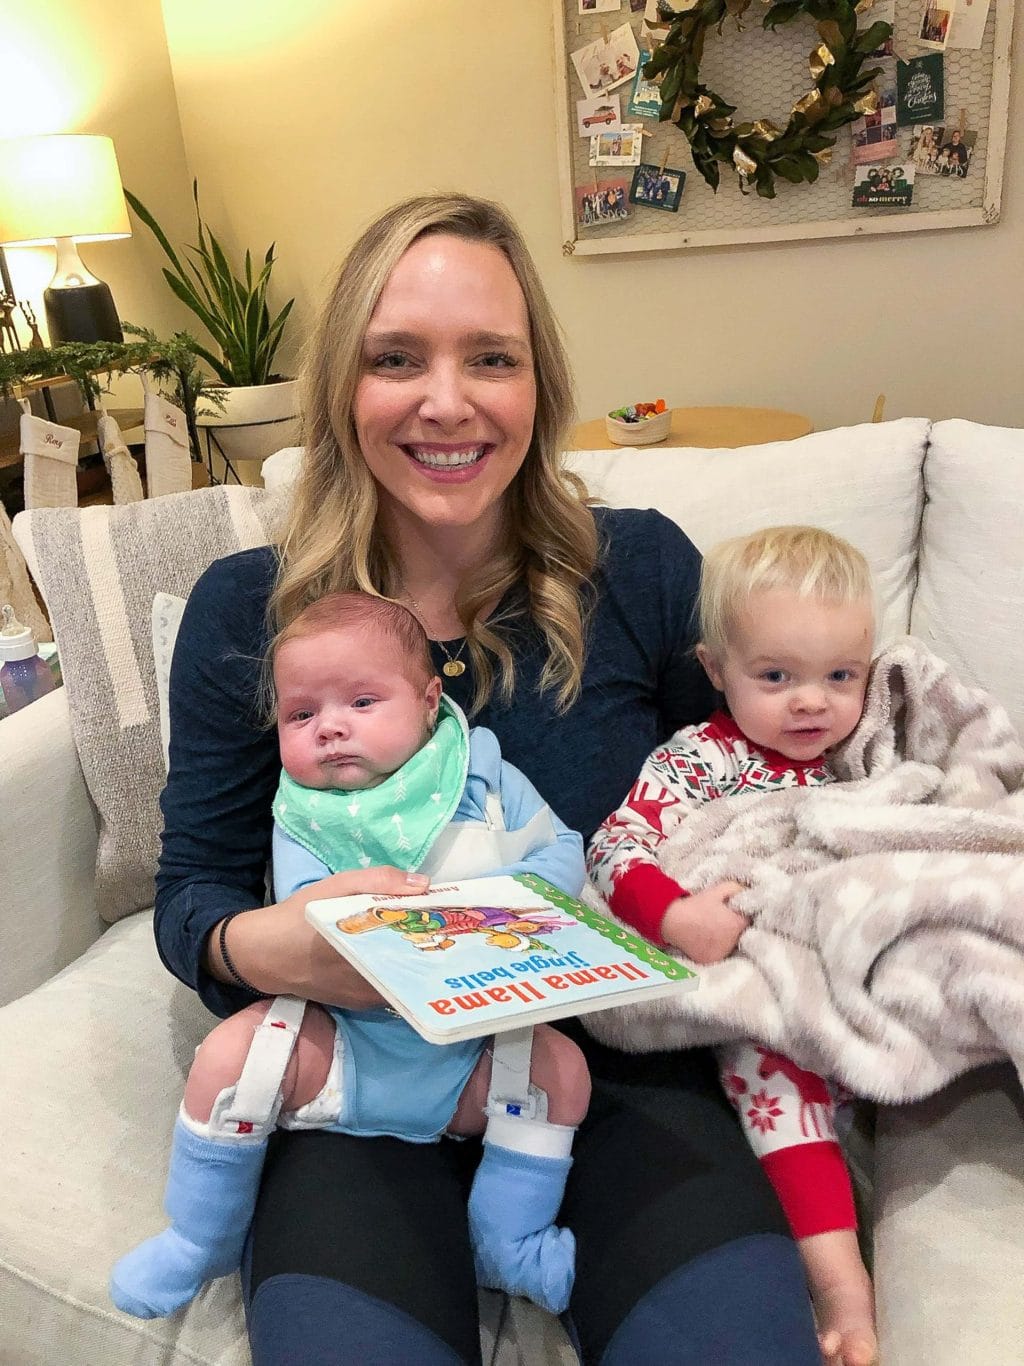 Sharing more about my life lately as a mom of two